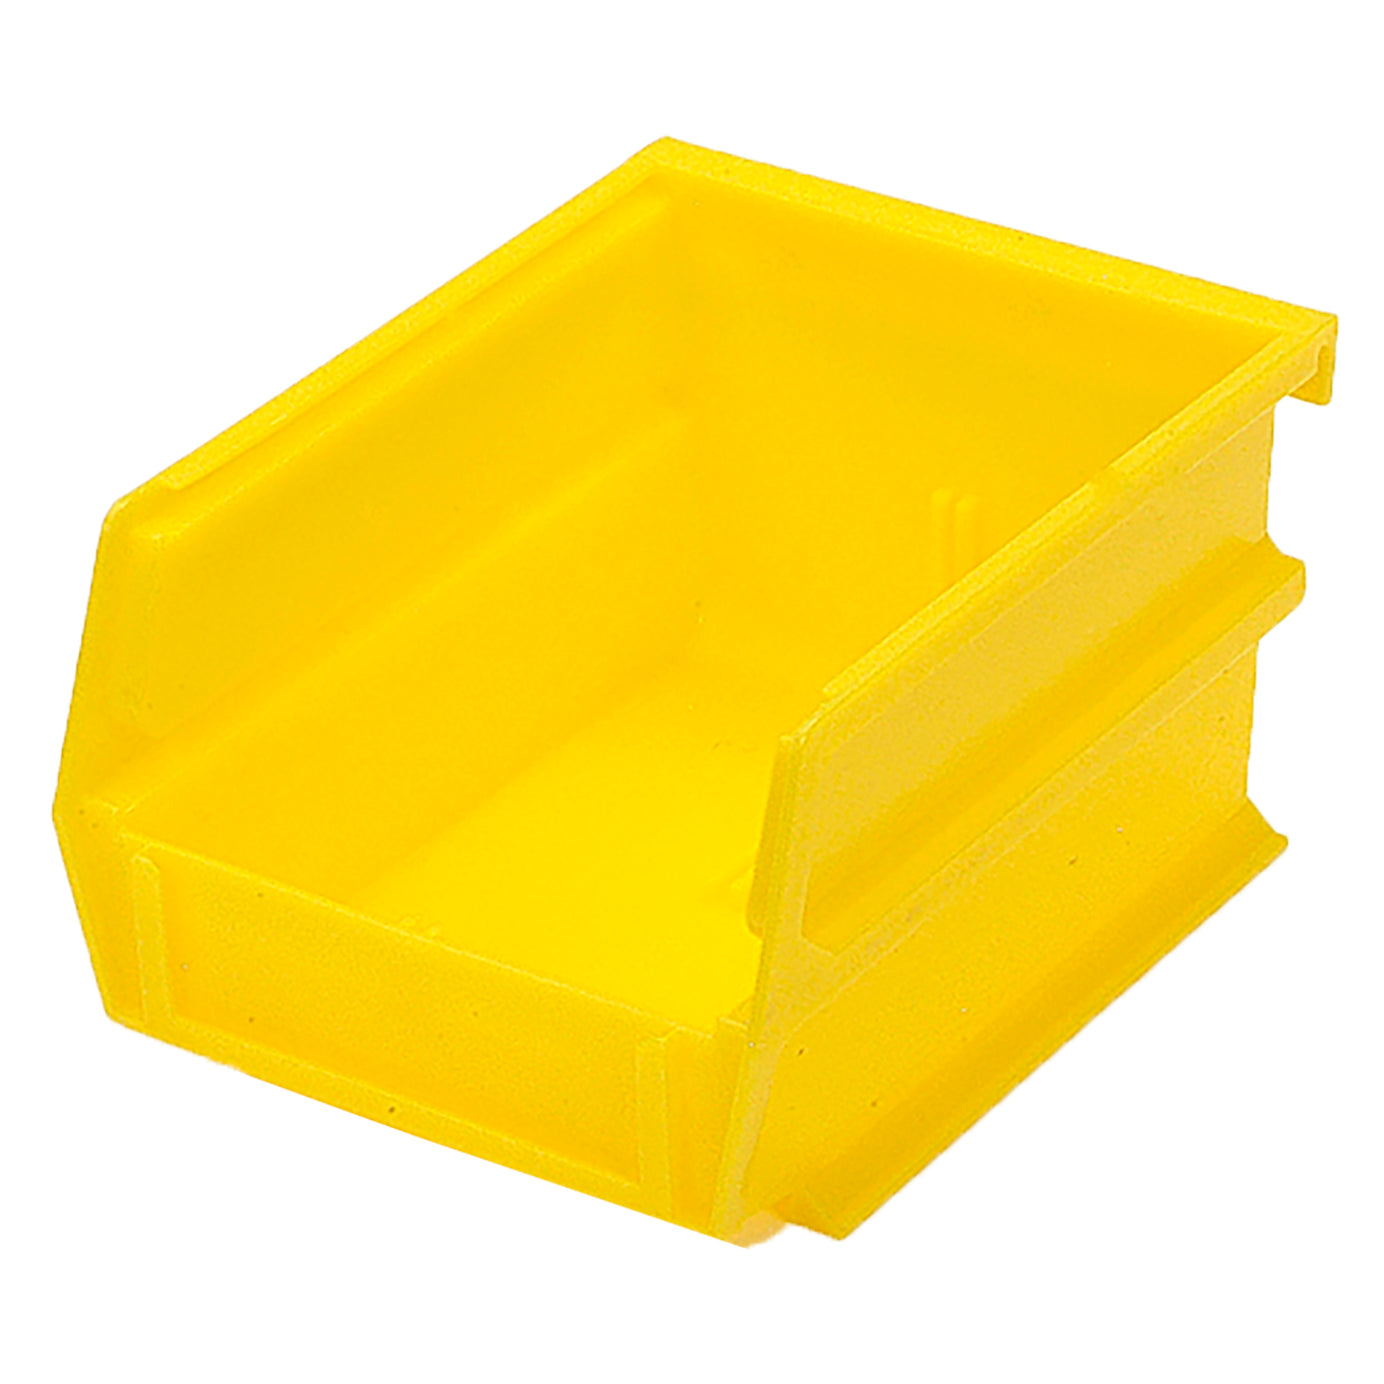 5-3/8 " L x 4-1/8 " W x 3 " H Yellow Stacking, Hanging, Inte alt 0